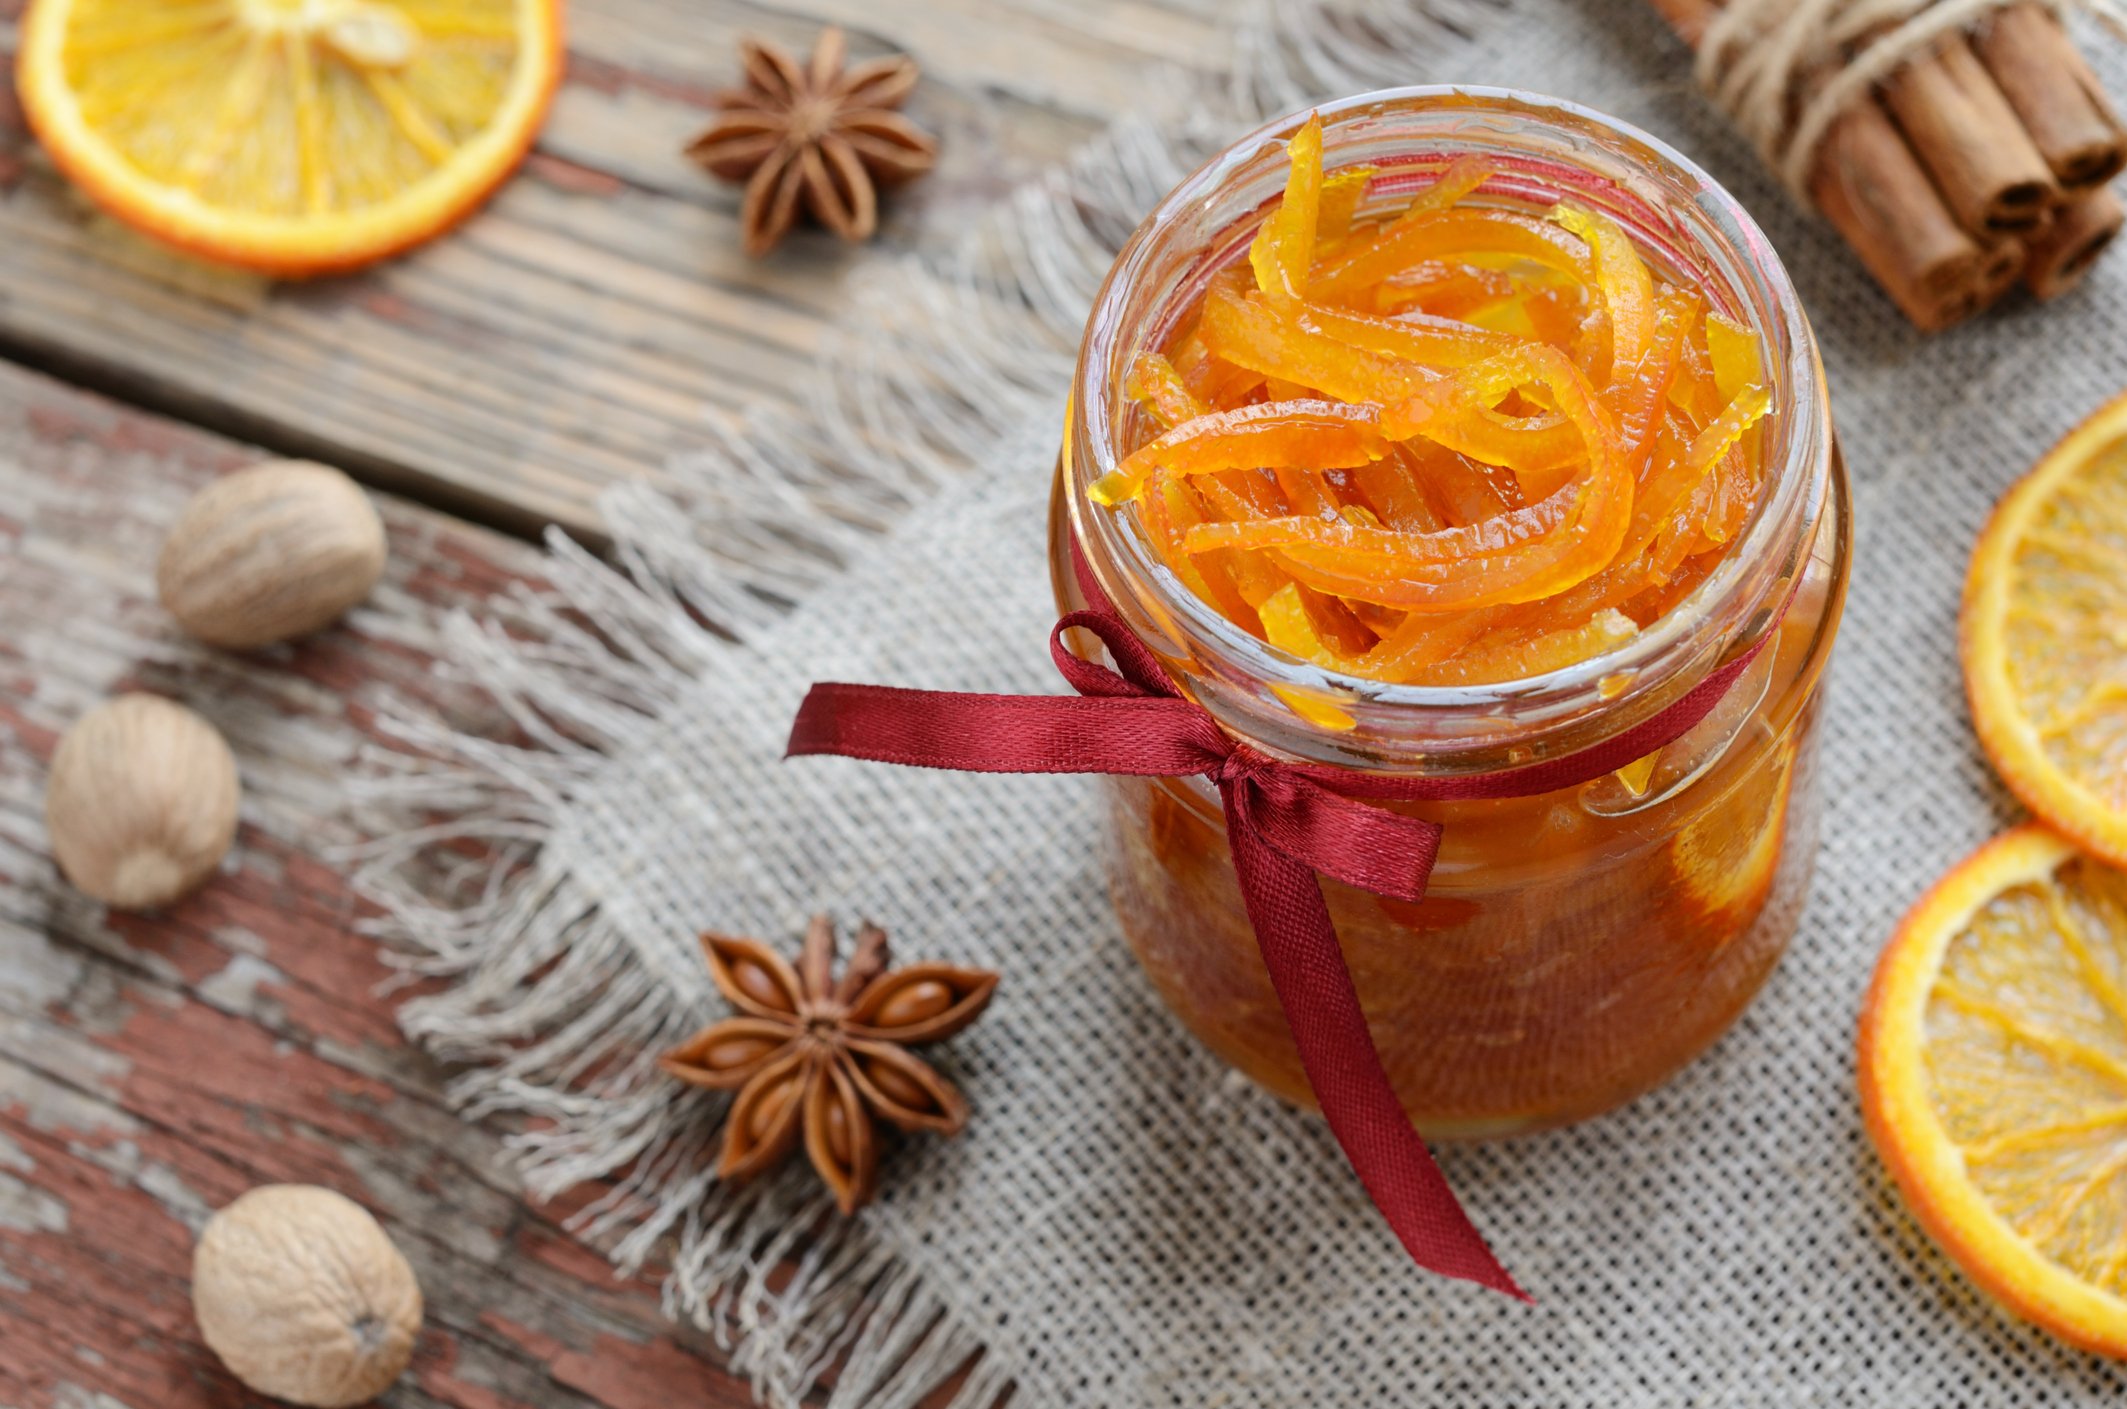 Bitter with a burst of tang, candied orange peels are the perfect sweet treat. (iStock Photo)